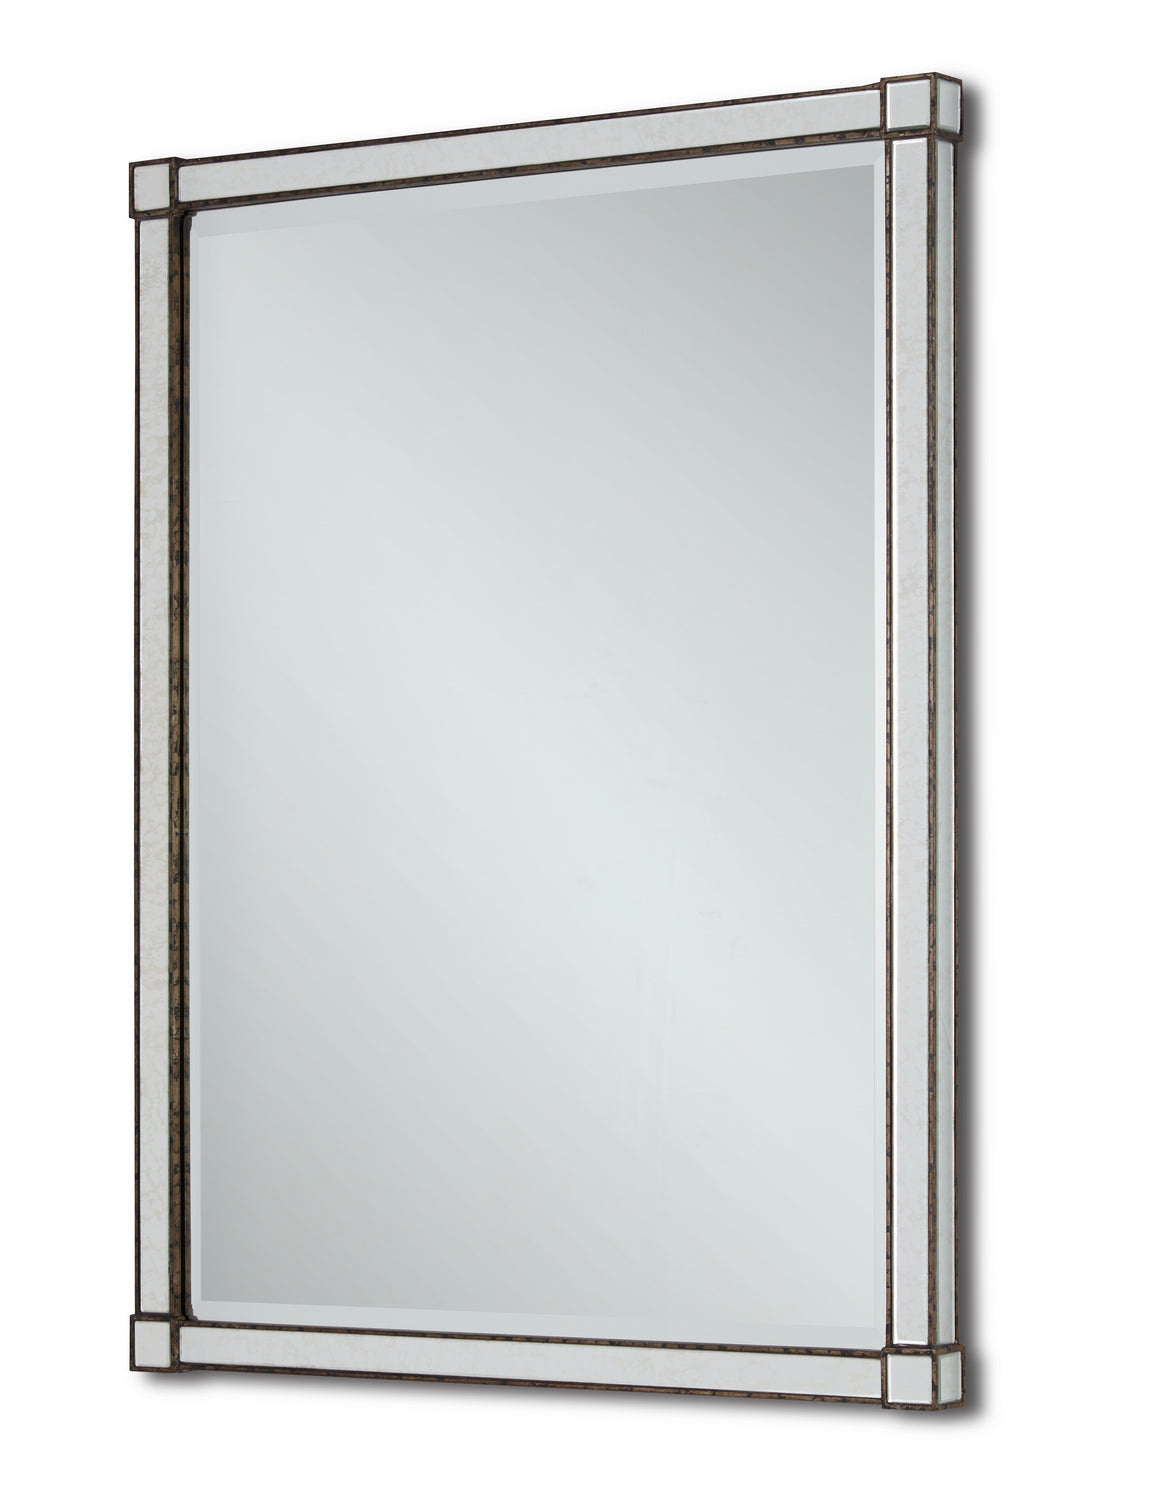 Mirror from the Monarch collection in Painted Silver Viejo/Light Antique Mirror finish